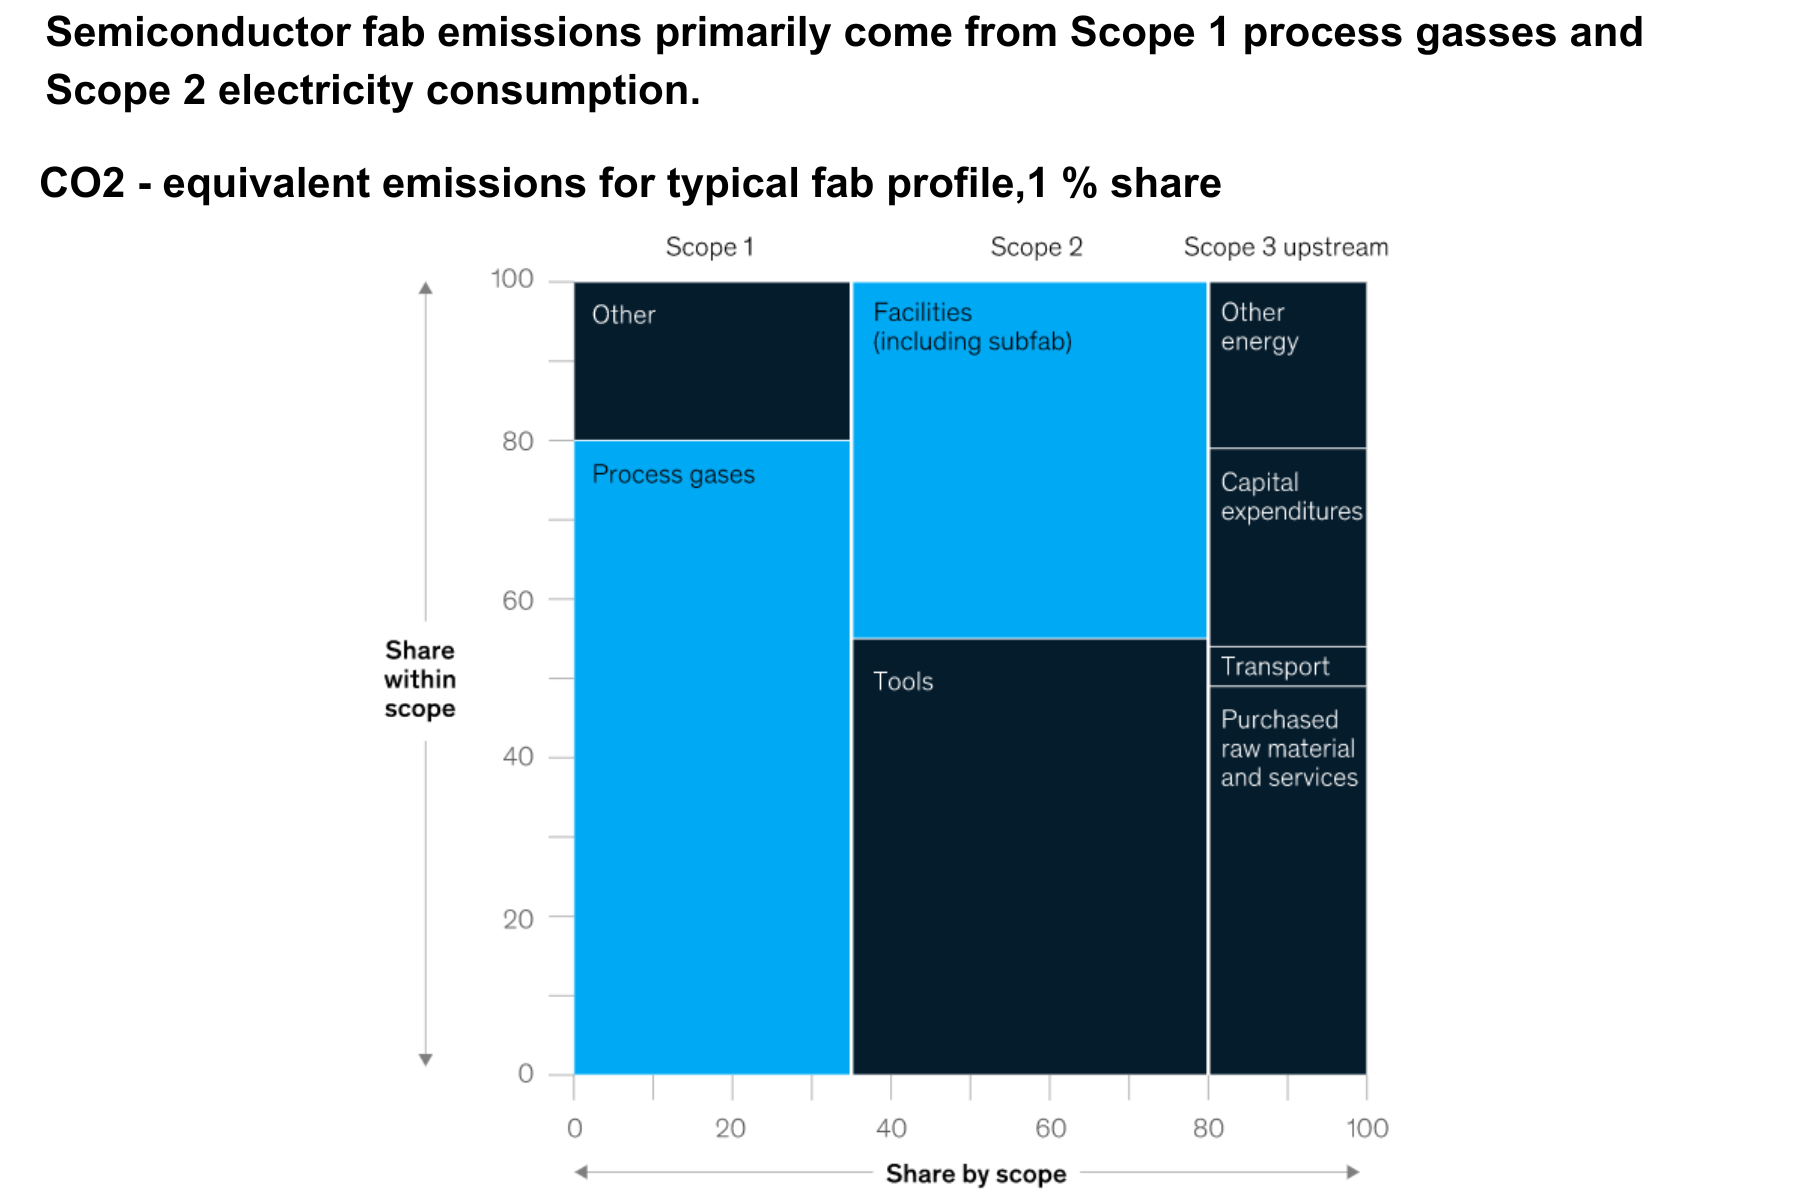 According to McKinsey’s research, semiconductor emissions come primarily from Scope 1 process gases and Scope 2 electricity consumption.